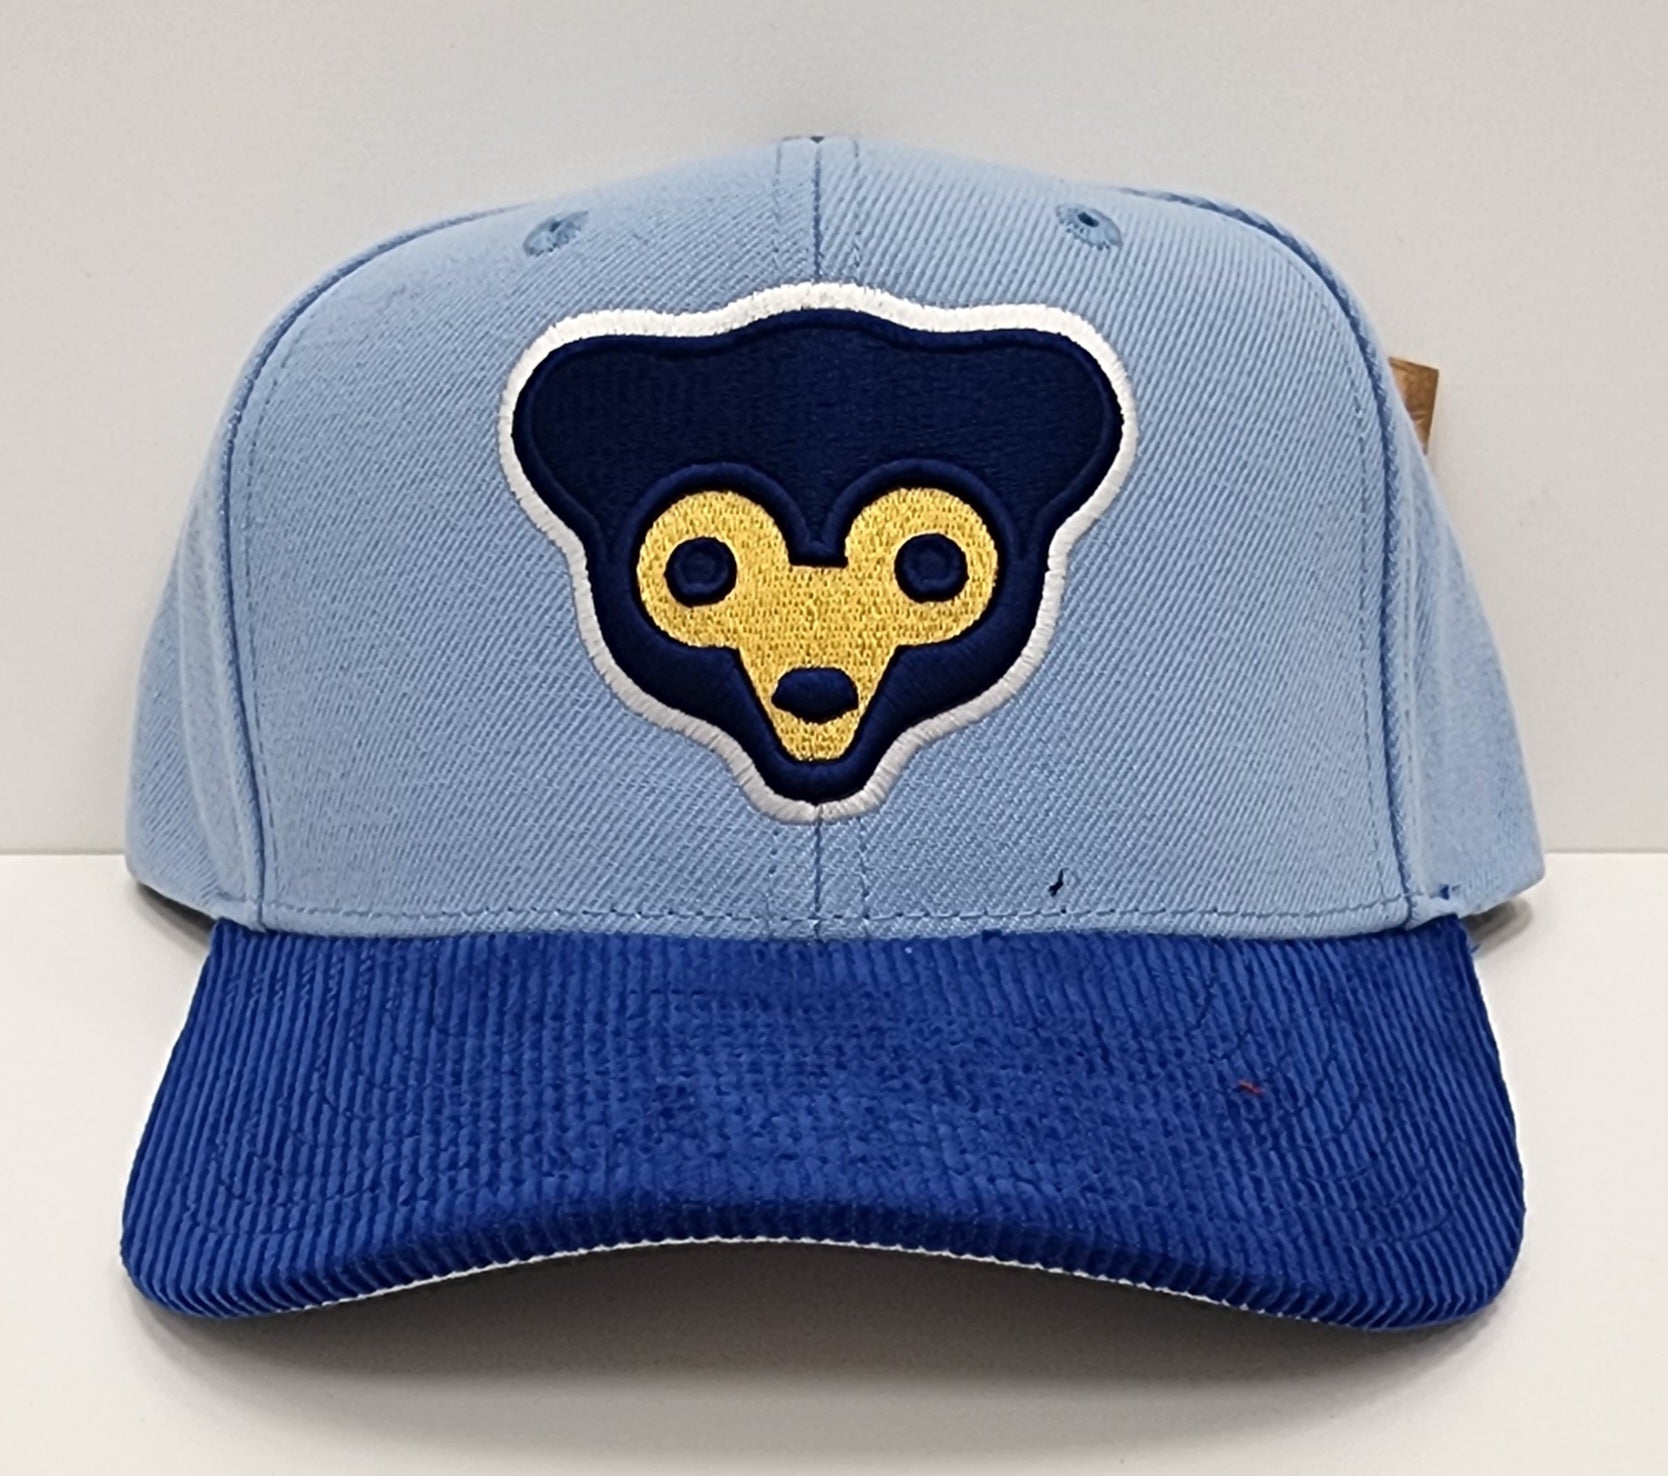 Mitchell & Ness MLB Cord Pro Snapback Coop Cubs